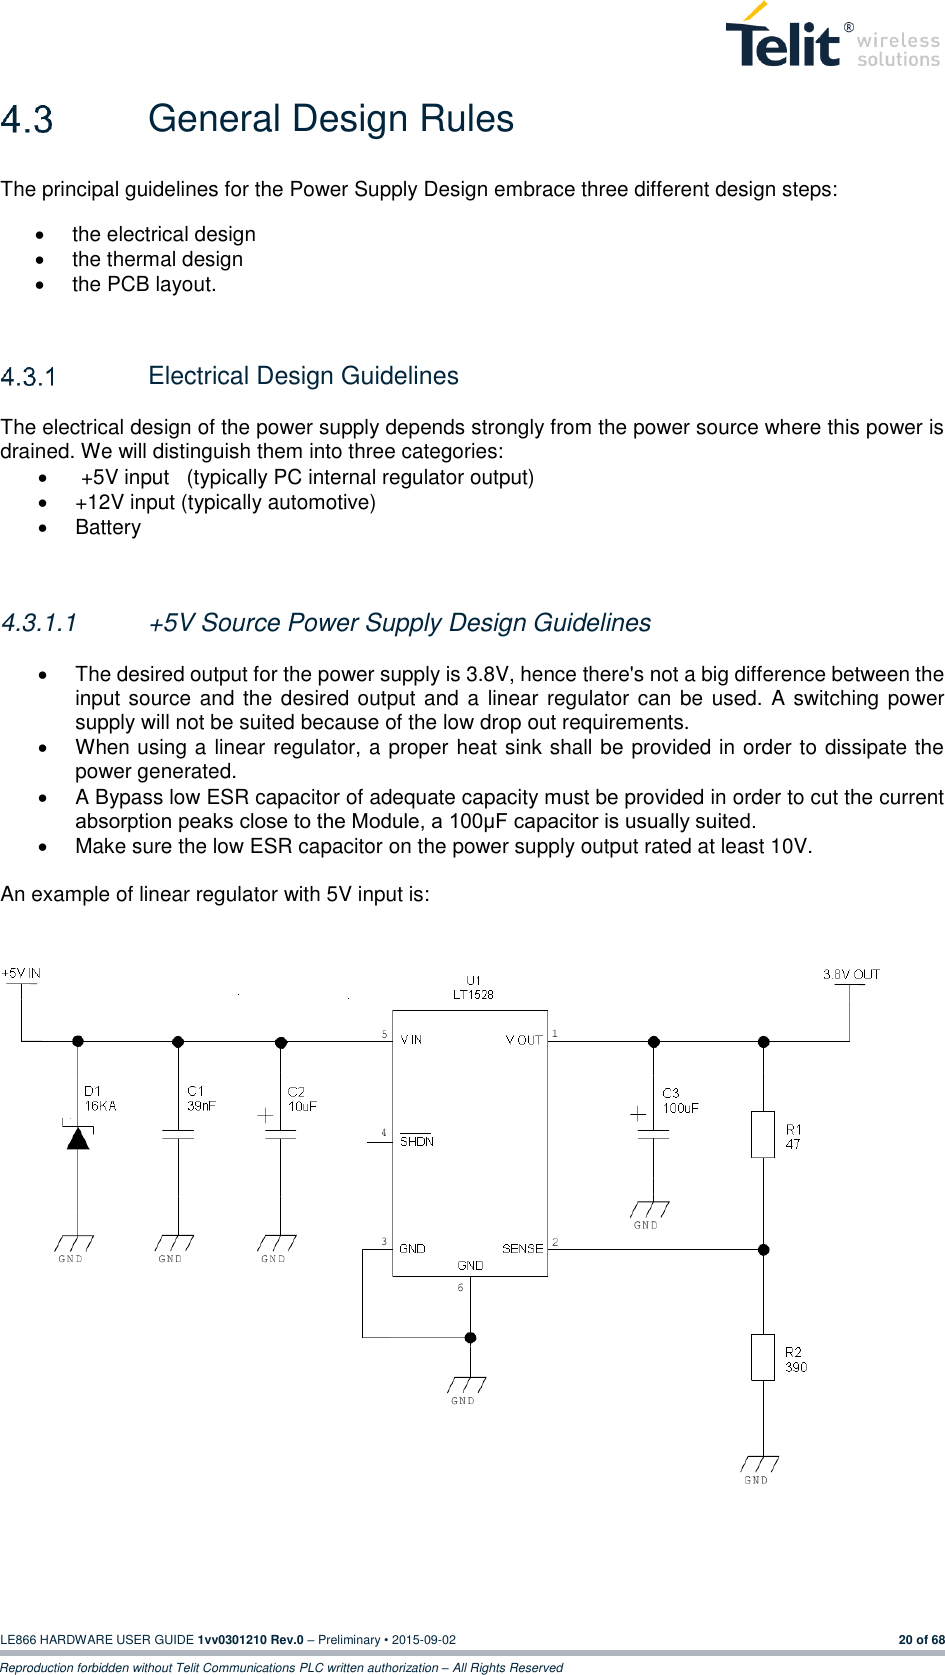  LE866 HARDWARE USER GUIDE 1vv0301210 Rev.0 – Preliminary • 2015-09-02 20 of 68 Reproduction forbidden without Telit Communications PLC written authorization – All Rights Reserved   General Design Rules The principal guidelines for the Power Supply Design embrace three different design steps:  the electrical design   the thermal design   the PCB layout.     Electrical Design Guidelines The electrical design of the power supply depends strongly from the power source where this power is drained. We will distinguish them into three categories:    +5V input   (typically PC internal regulator output)   +12V input (typically automotive)   Battery   4.3.1.1  +5V Source Power Supply Design Guidelines    The desired output for the power supply is 3.8V, hence there&apos;s not a big difference between the input source and the desired output and a  linear regulator can  be  used. A switching power supply will not be suited because of the low drop out requirements.   When using a linear regulator, a proper heat sink shall be provided in order to dissipate the power generated.   A Bypass low ESR capacitor of adequate capacity must be provided in order to cut the current absorption peaks close to the Module, a 100μF capacitor is usually suited.   Make sure the low ESR capacitor on the power supply output rated at least 10V.  An example of linear regulator with 5V input is:      